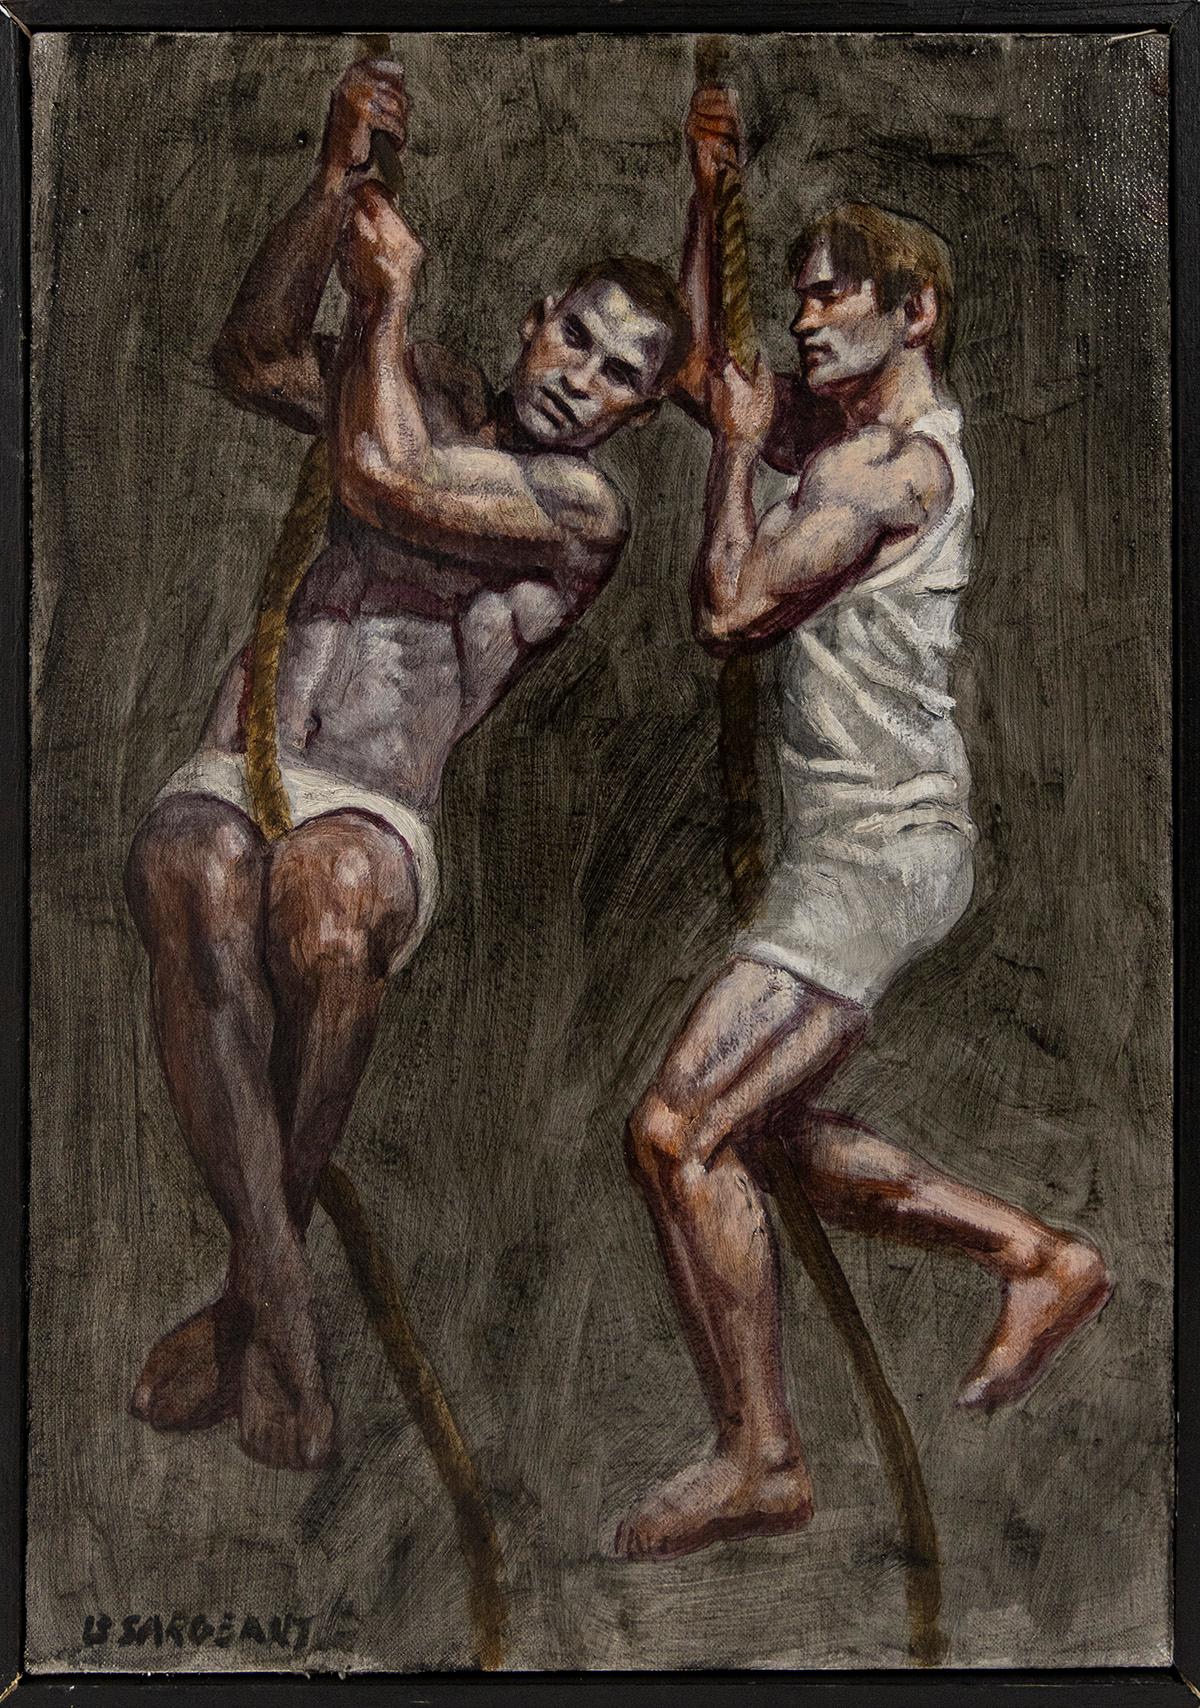 [Bruce Sargeant (1898-1938)] Two Men on Ropes